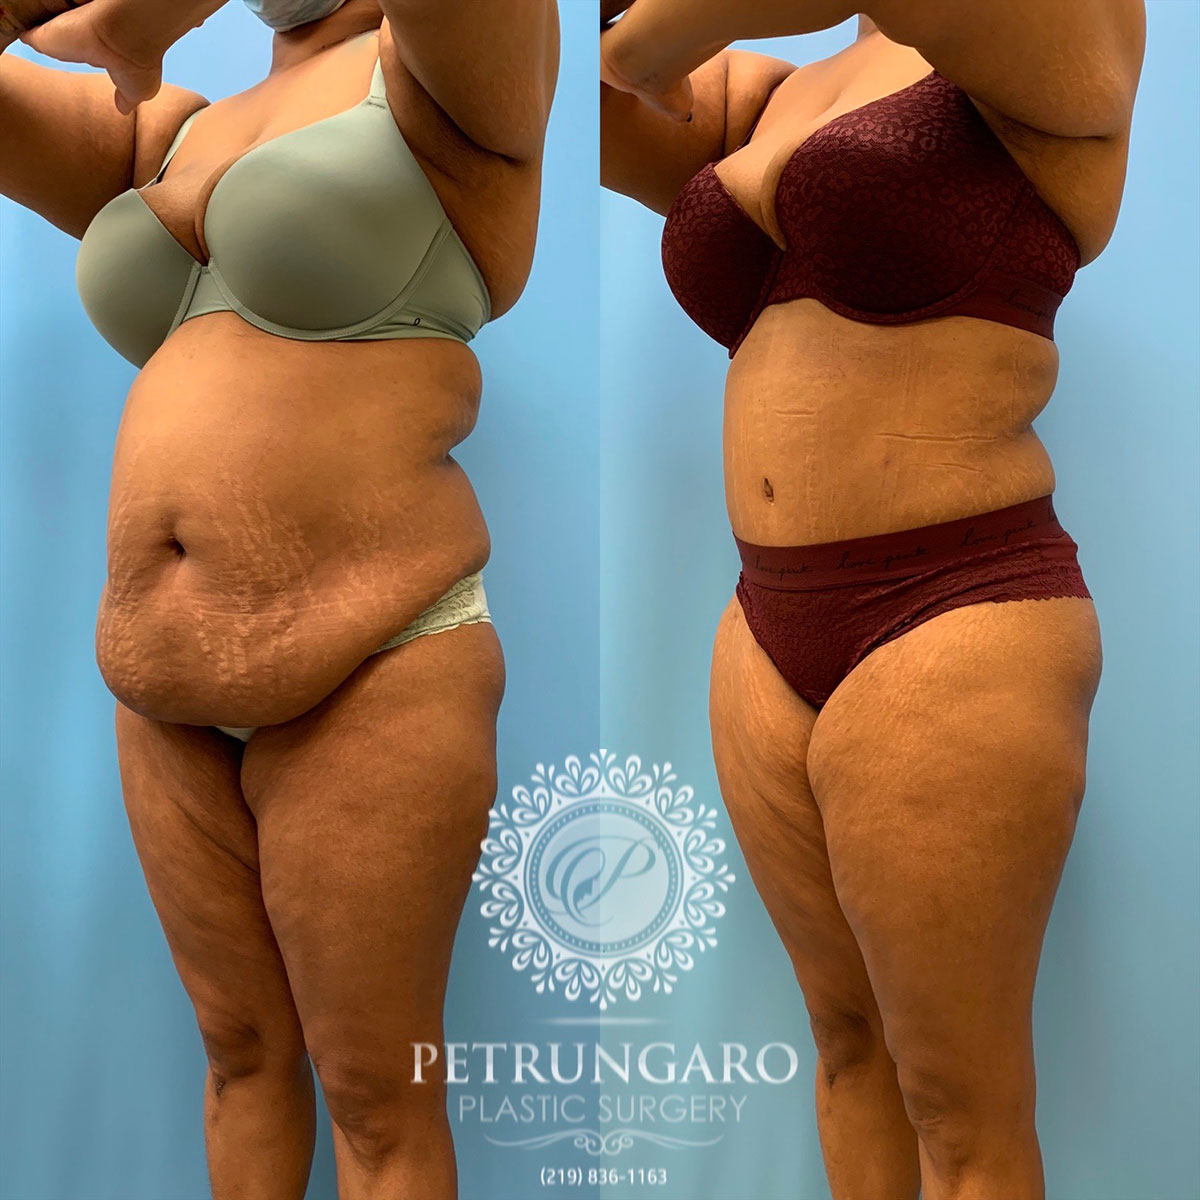 37 year old woman 3 months after tummy tuck with Lipo 360-5